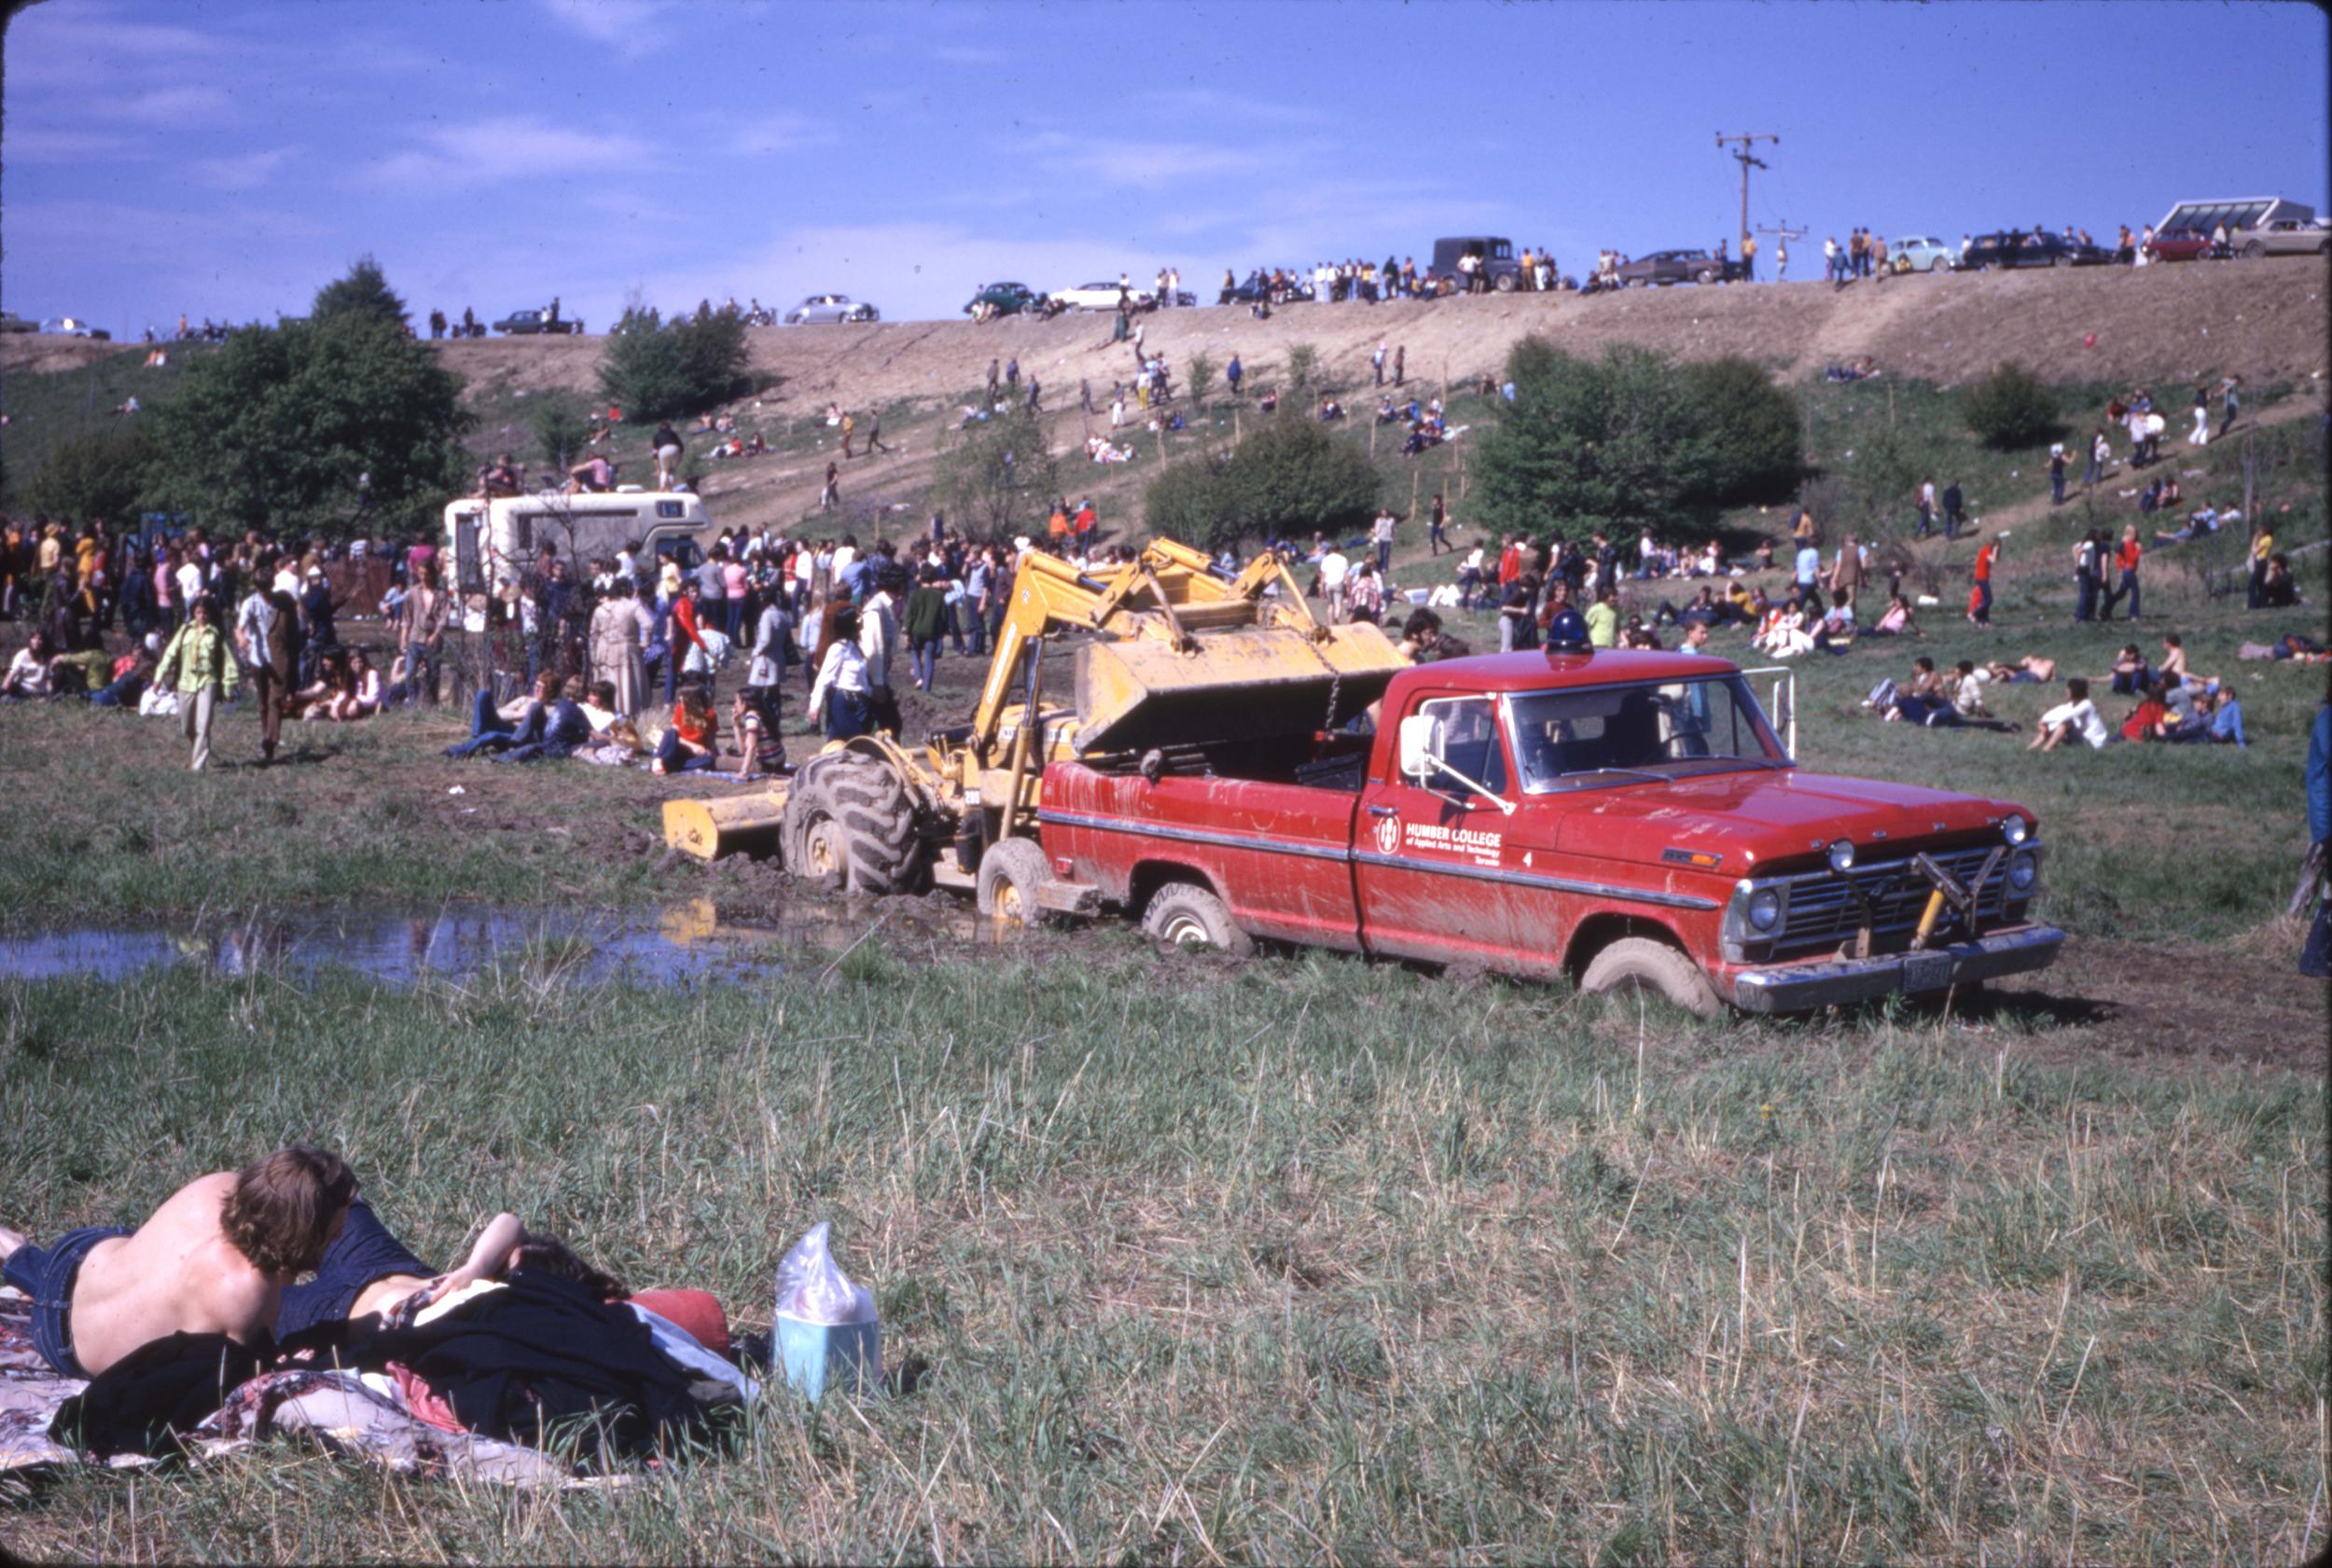 A pickup truck sits in a field with farm machinery behind it. A large number of people are gathered nearby.